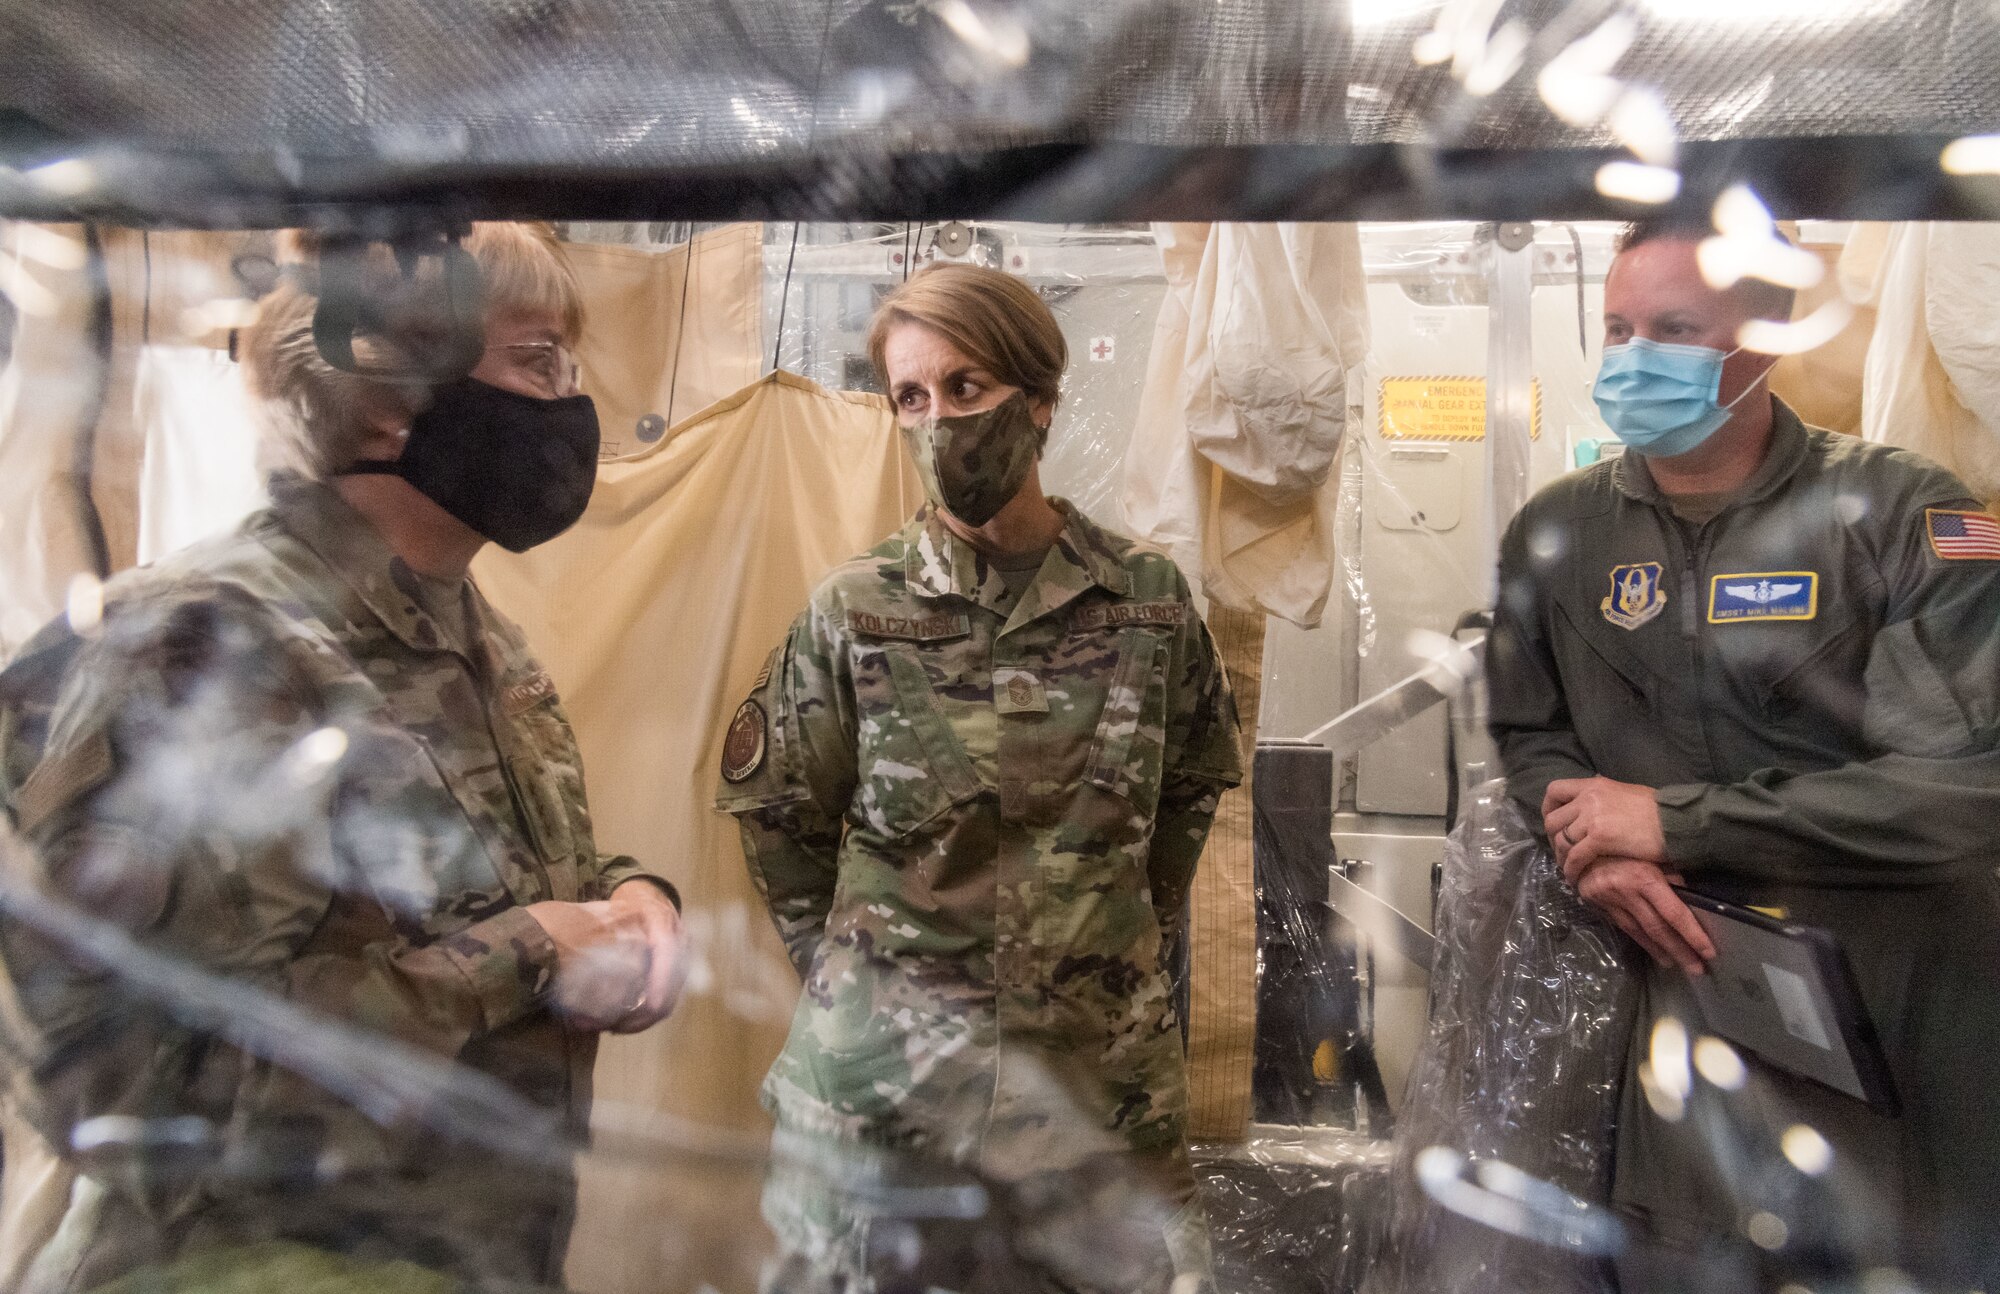 From the left, Lt. Gen. Dorothy Hogg, U.S. Air Force surgeon general, and Chief Master Sgt. Dawn Kolczynski, AF/SG chief of medical operations, talk with Senior Master Sgt. Michael Malone, 36th Aeromedical Evacuation Squadron training noncommissioned officer in charge and AE technician, from Keesler Air Force Base, Mississippi, inside a Transport Isolation System, June 26, 2020, at Dover Air Force Base, Delaware. Dover serves as the U.S. East Coast hub for the TIS. (U.S. Air Force photo by Roland Balik)